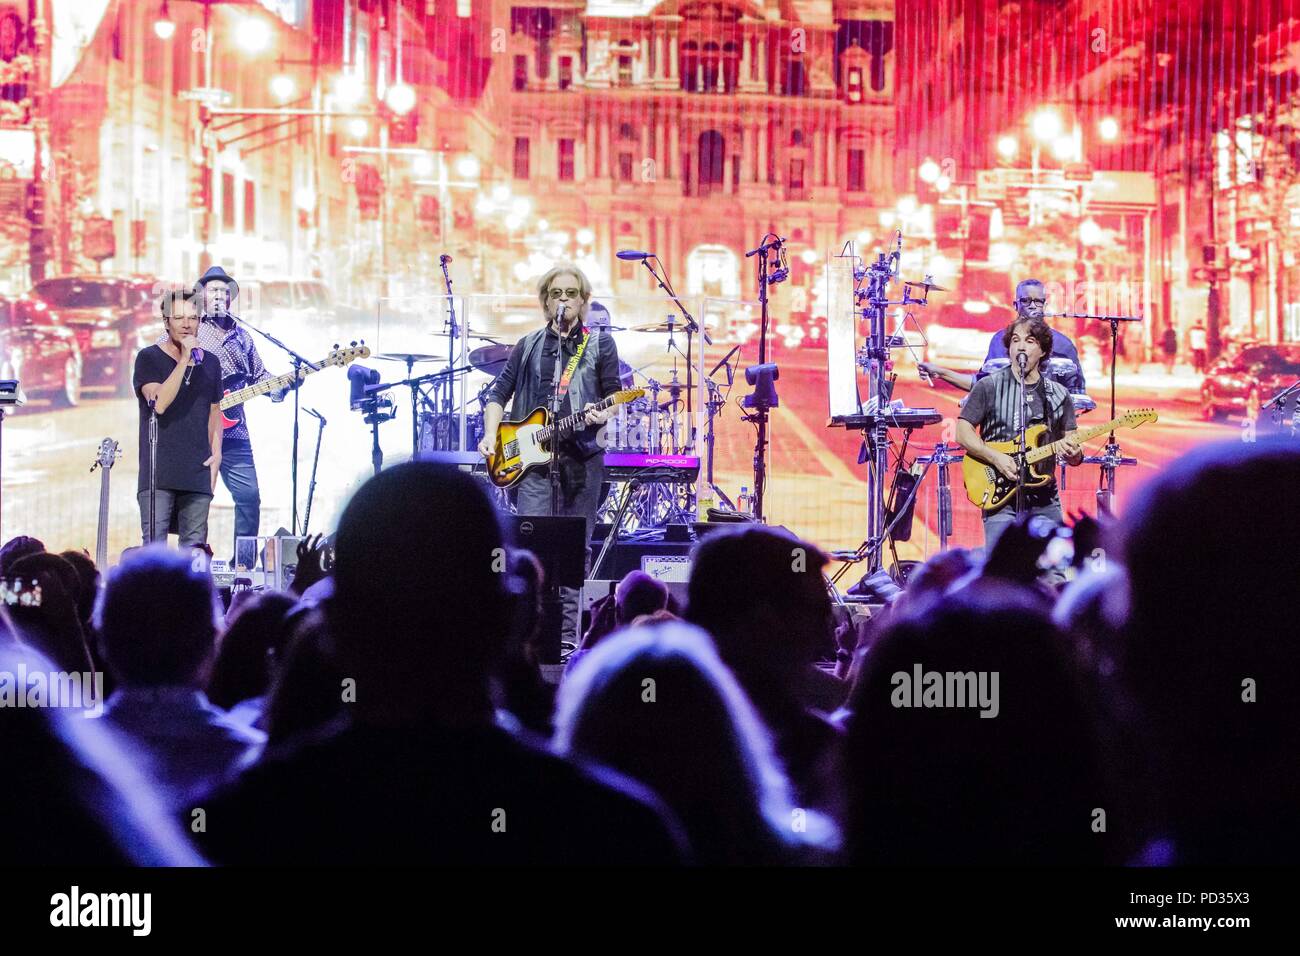 San Diego, California, USA. 4th Aug, 2018. PAT MONAHAN (L) joins DARYL HALL (C) and JOHN OATES (R) at Viejas Arena in San Diego, California on August 4, 2018 Credit: Marissa Carter/ZUMA Wire/Alamy Live News Stock Photo